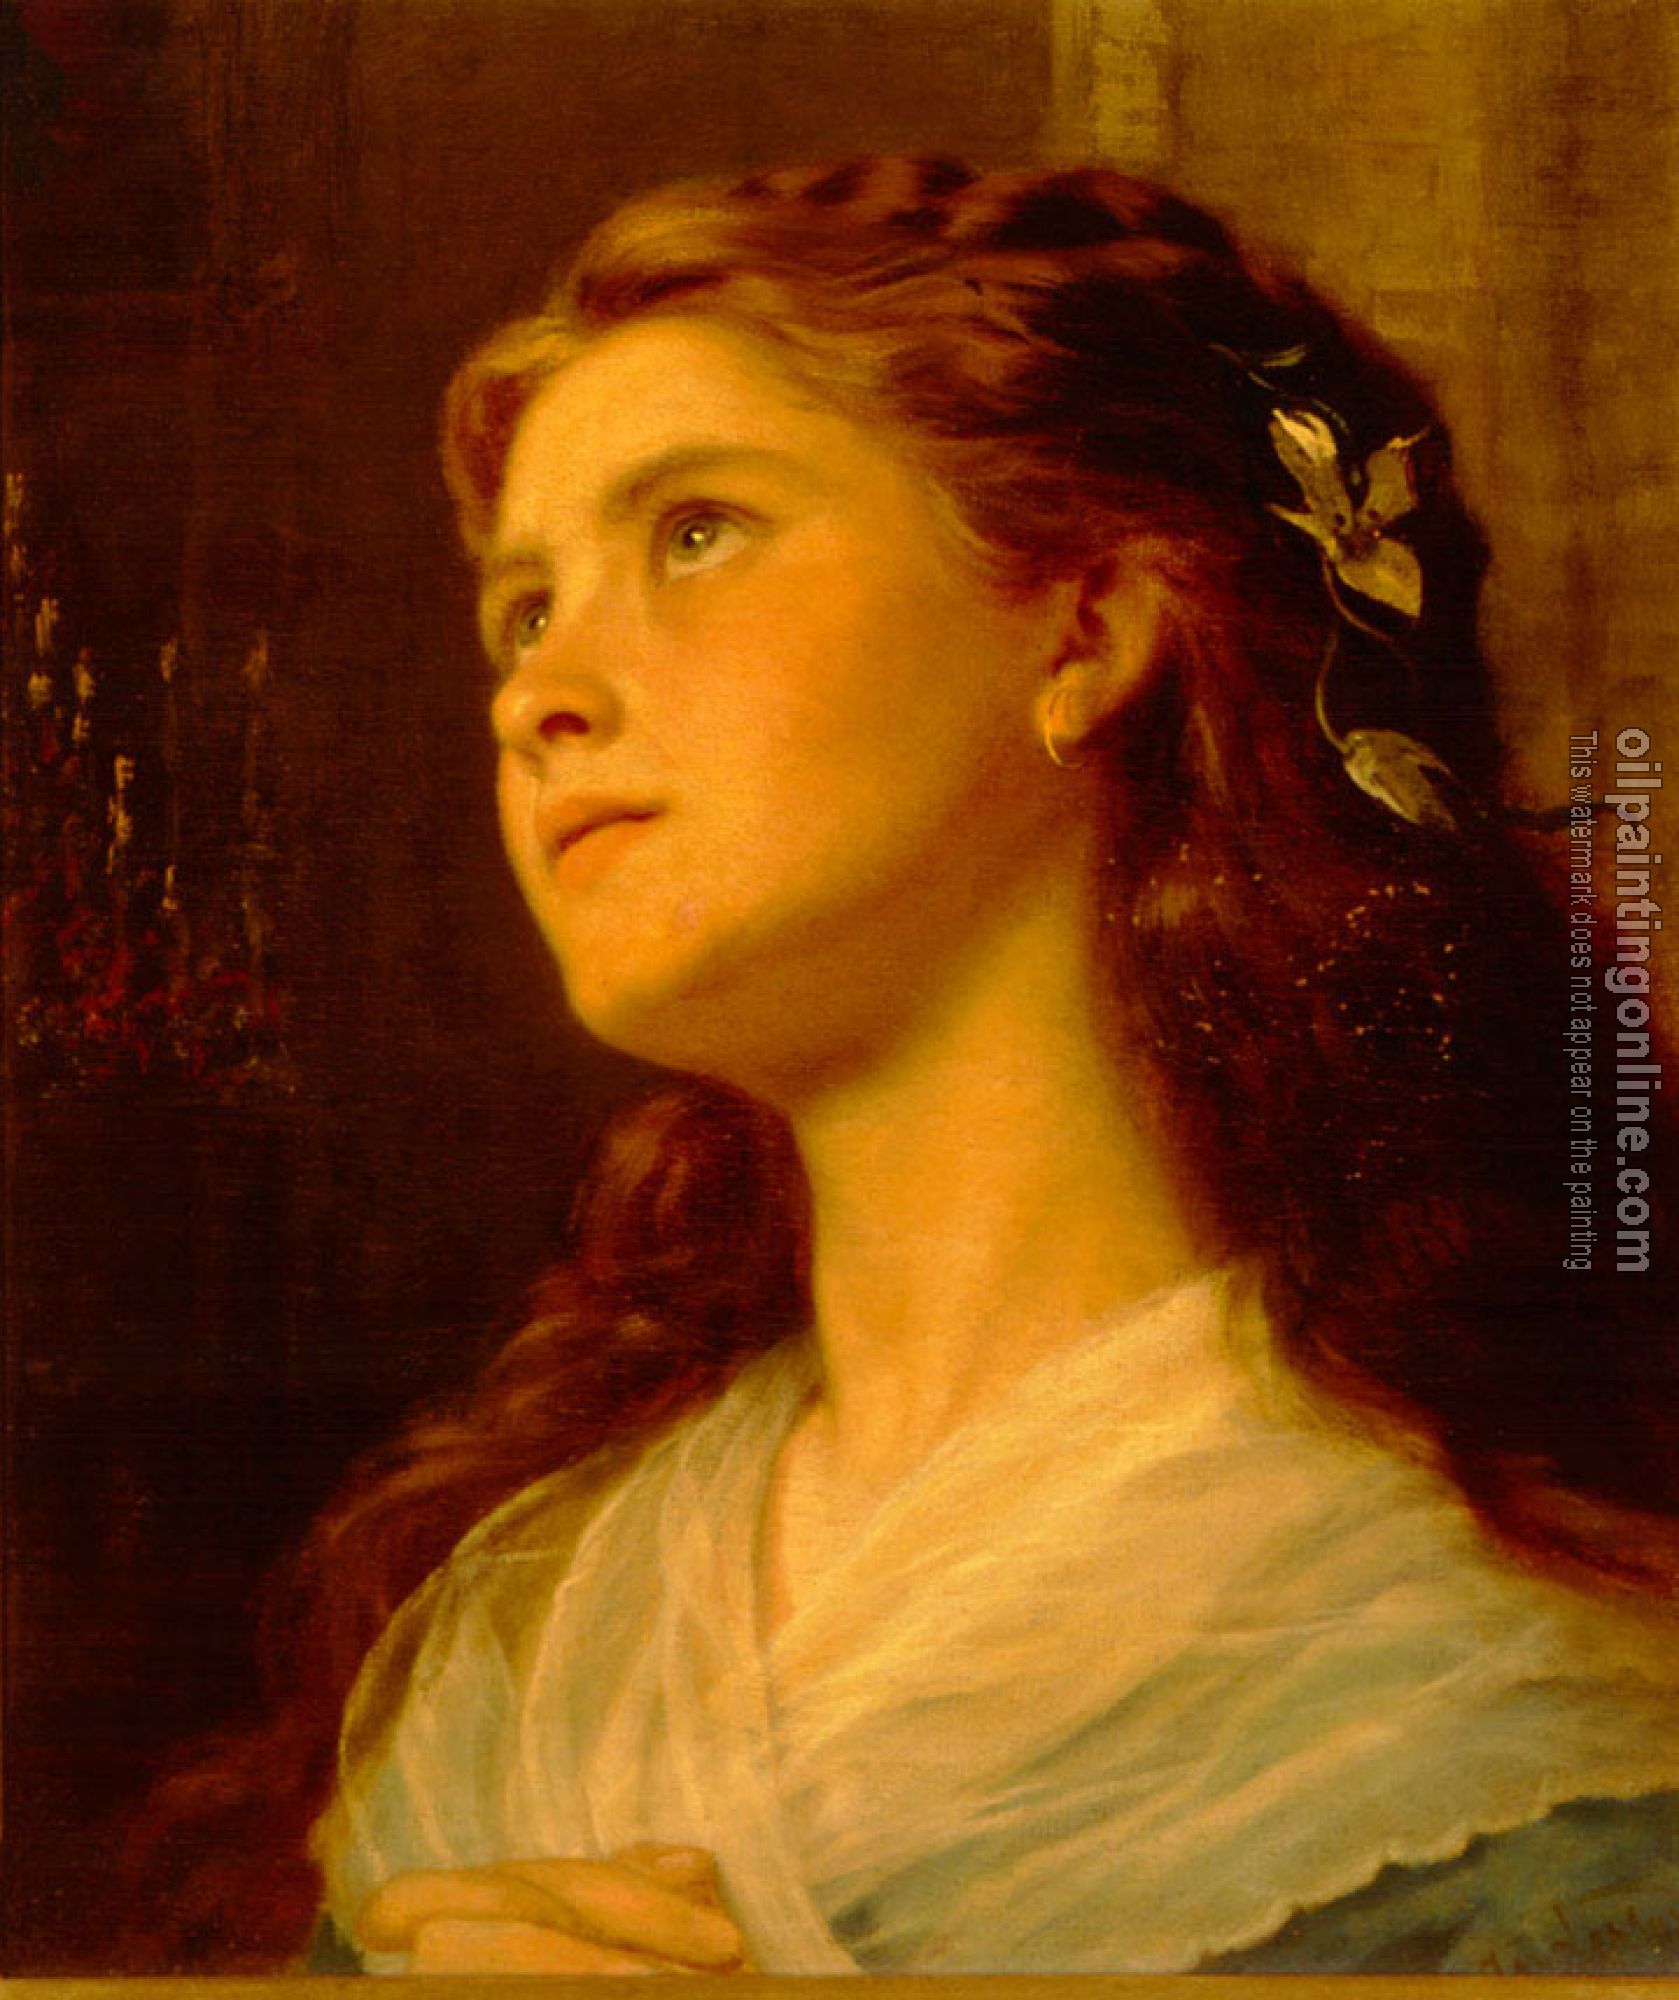 Anderson, Sophie Gengembre - Portrait of a Young Girl